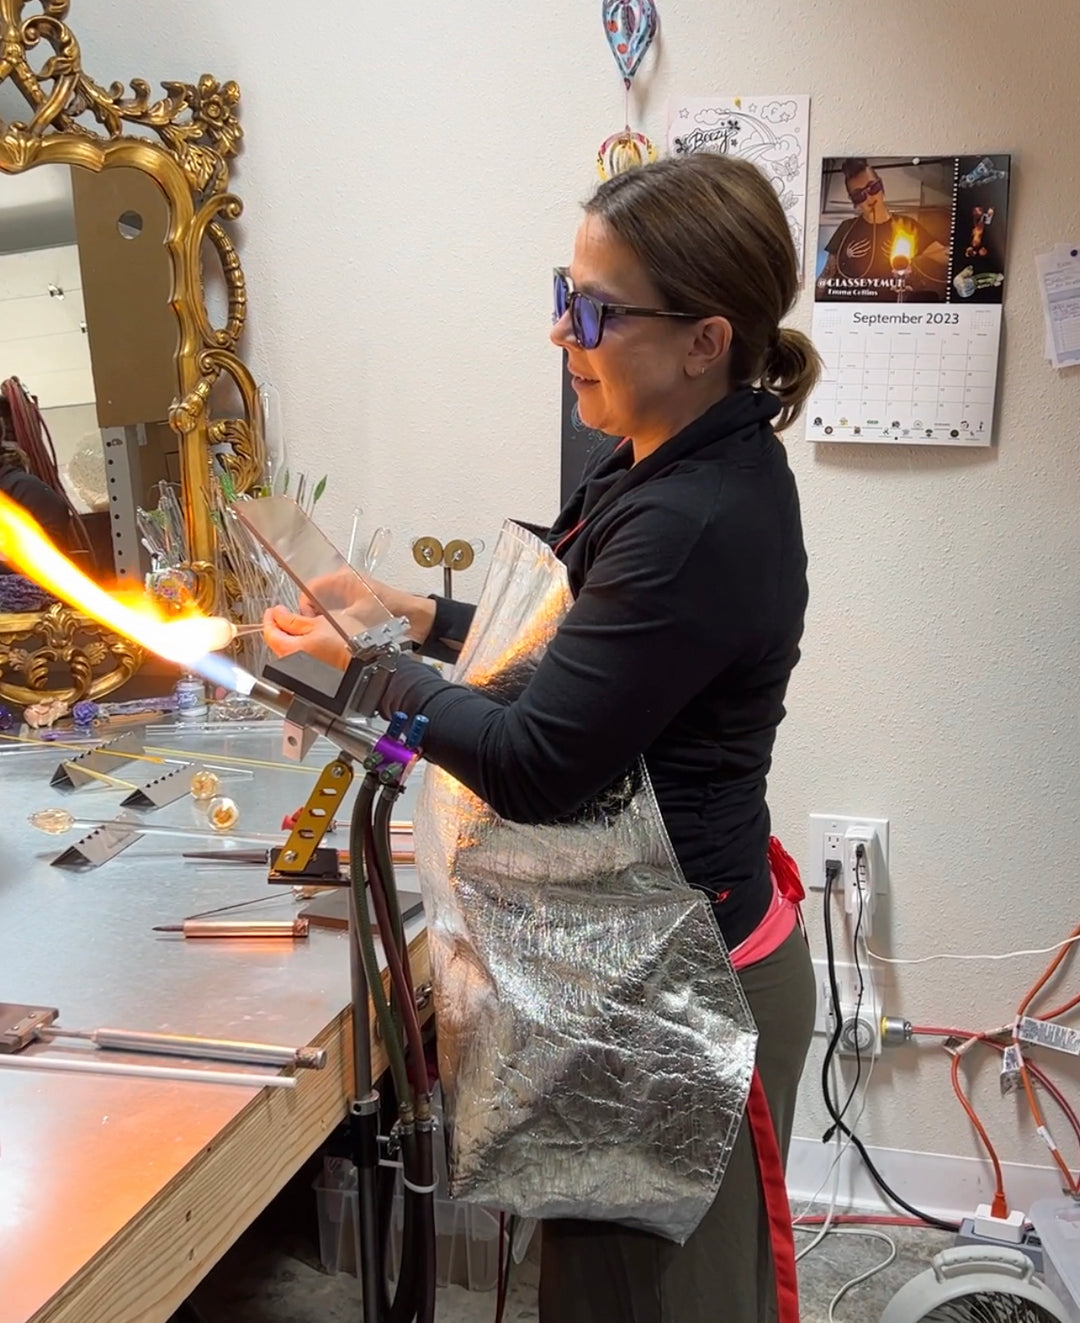 My Wife 10 Months Pregnant and Blowing Glass